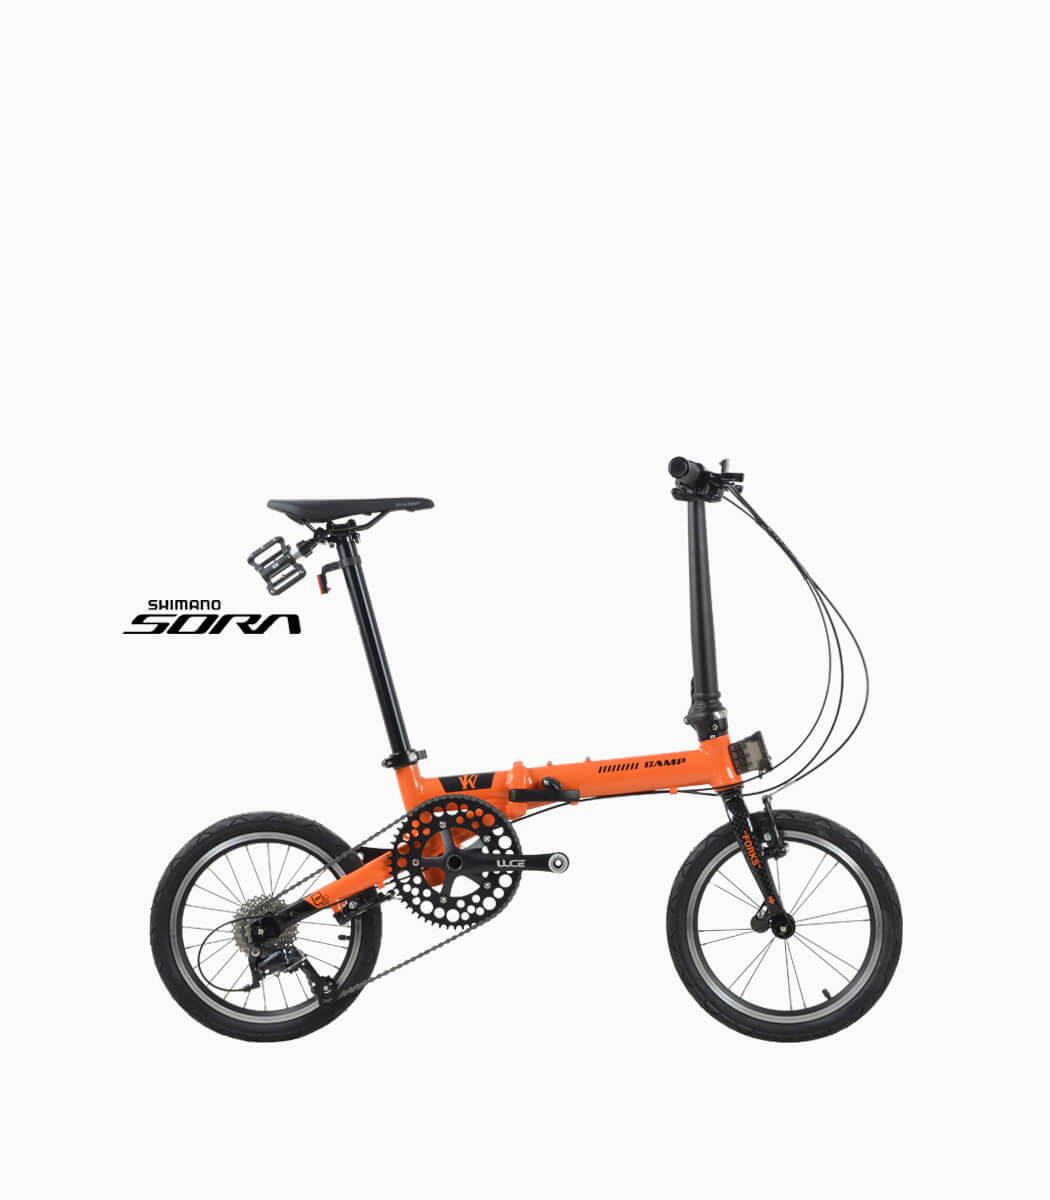 CAMP LITE (ORANGE) foldable bicycle right